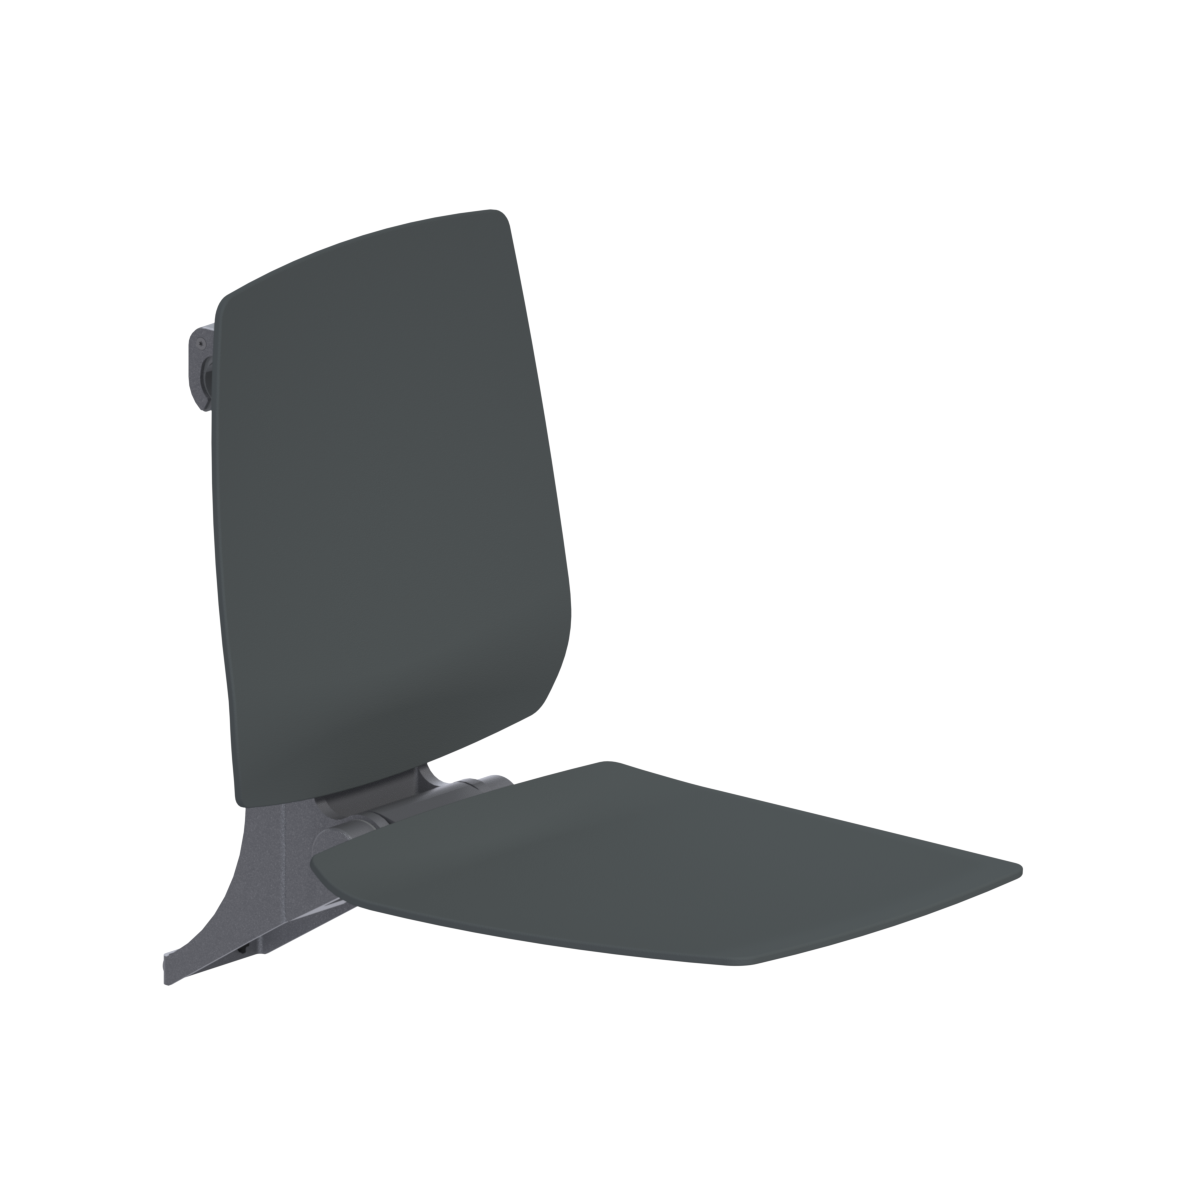 Ascento Hanging seat FR, with Backrest, for Cavere Care, 412 x 640 x 574 mm, Ascento Dark grey